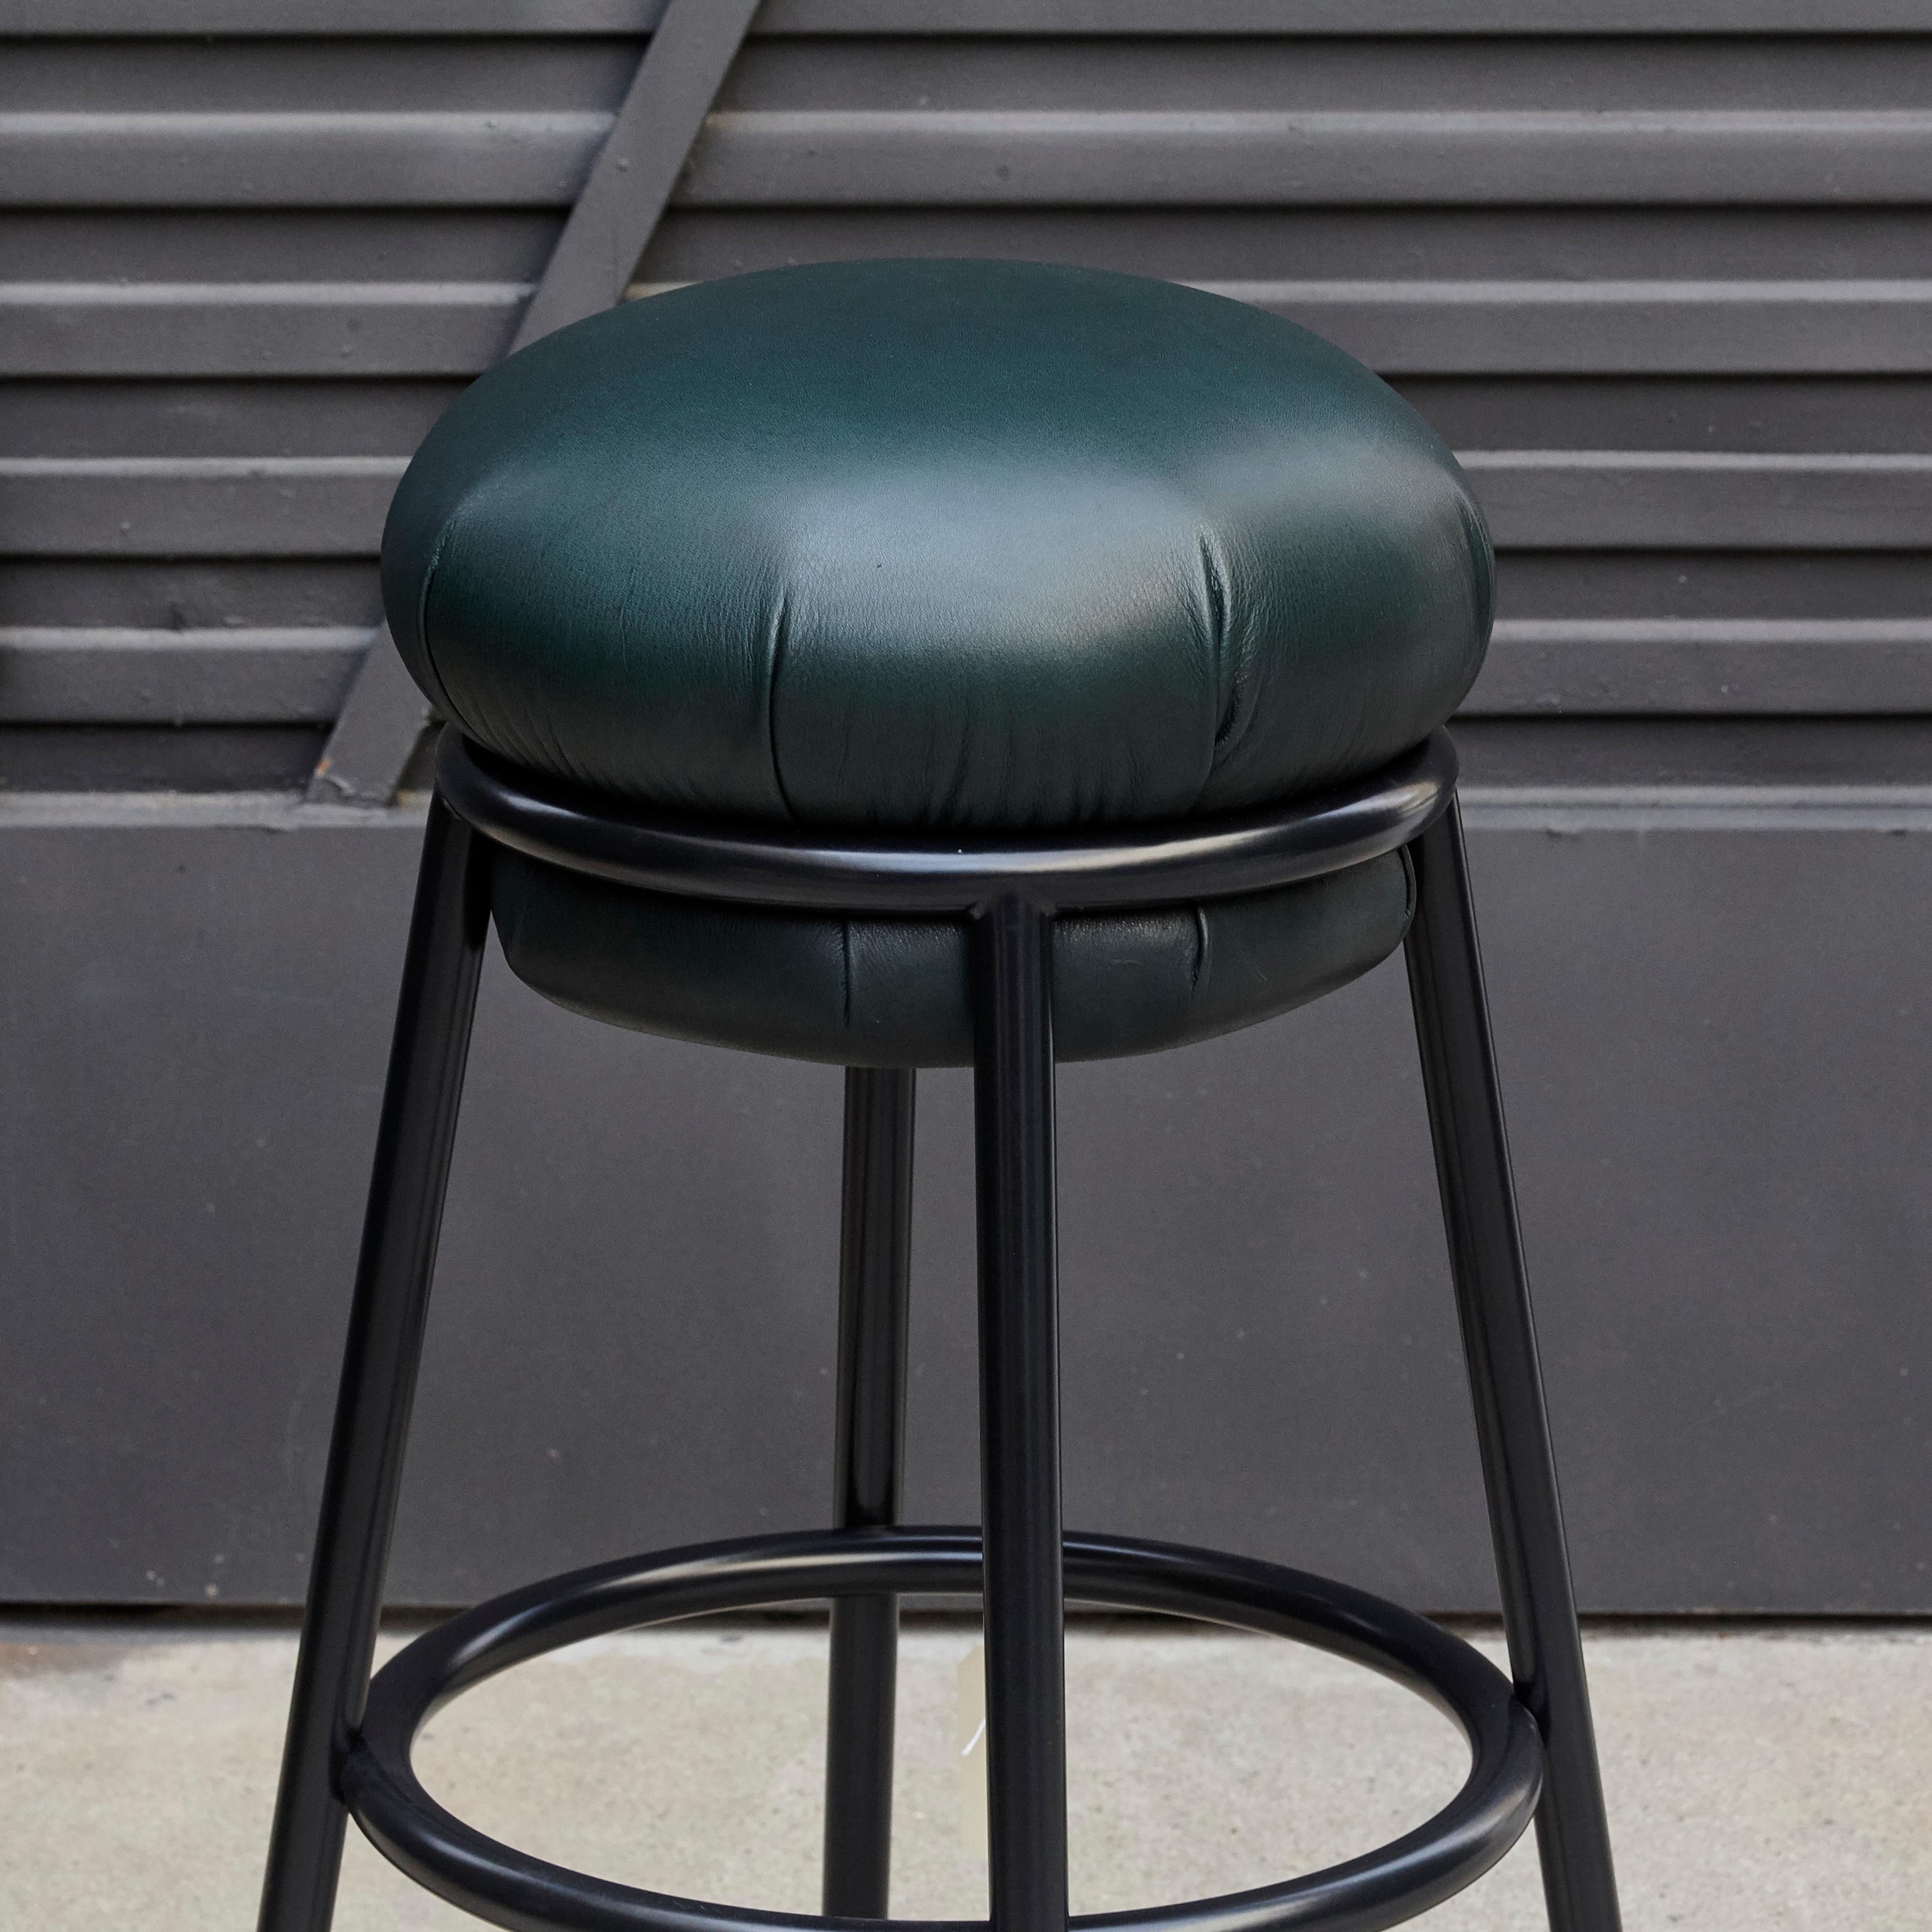 Iron Stephen Burks Grasso Contemporary Green Leather, Black Lacquered Metal Stool